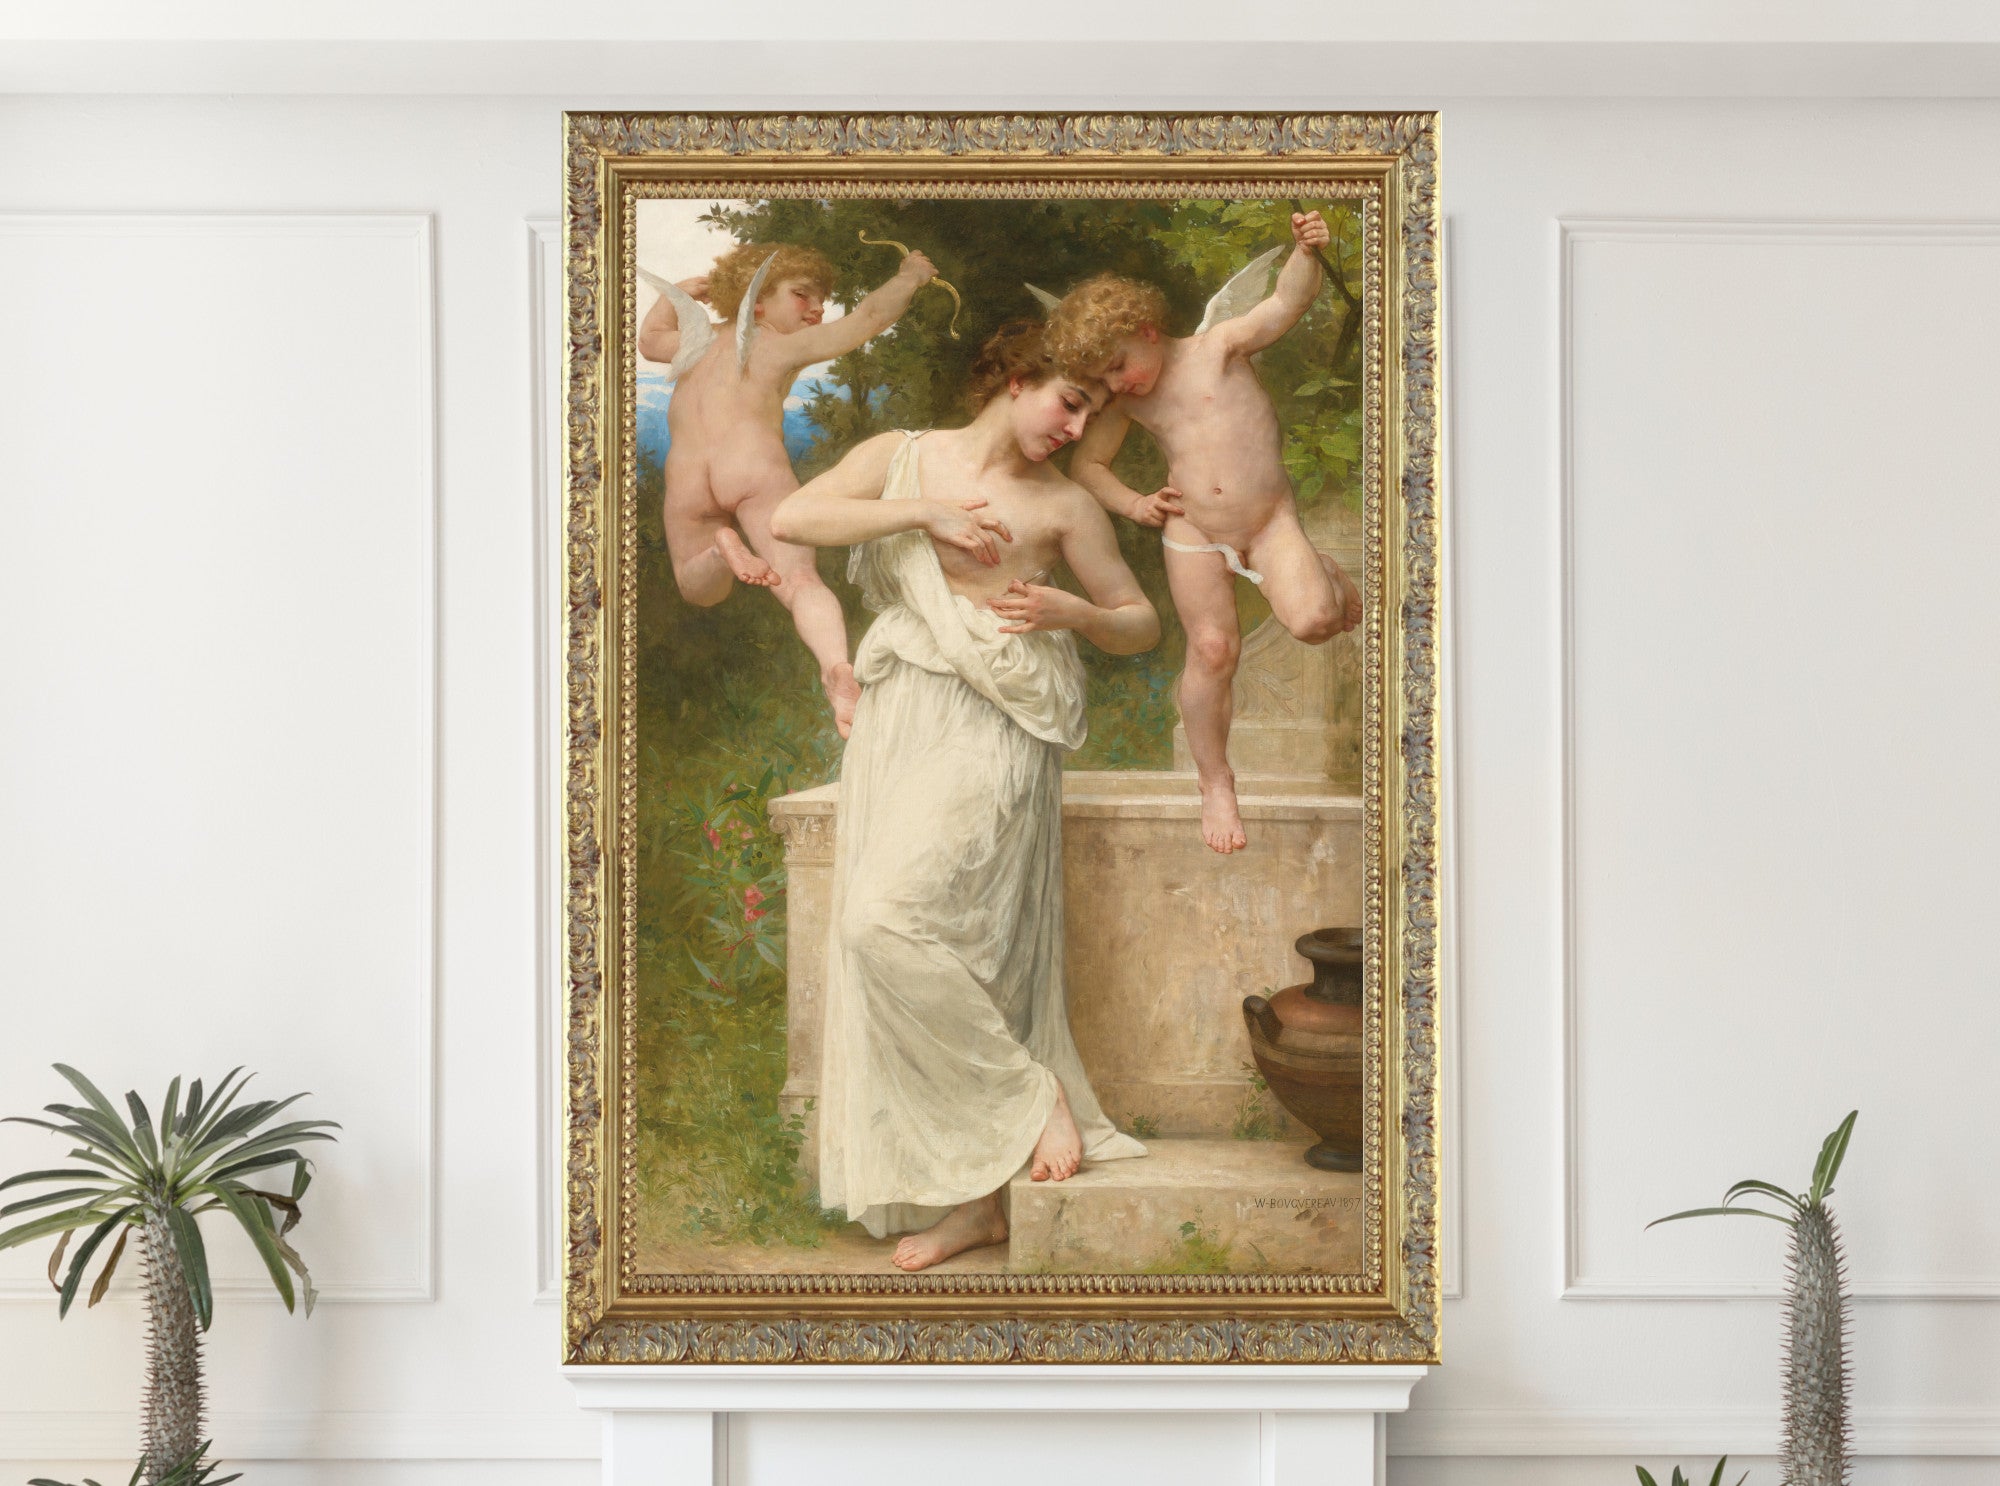 William-Adolphe Bouguereau, Blessures D’amour (1897)